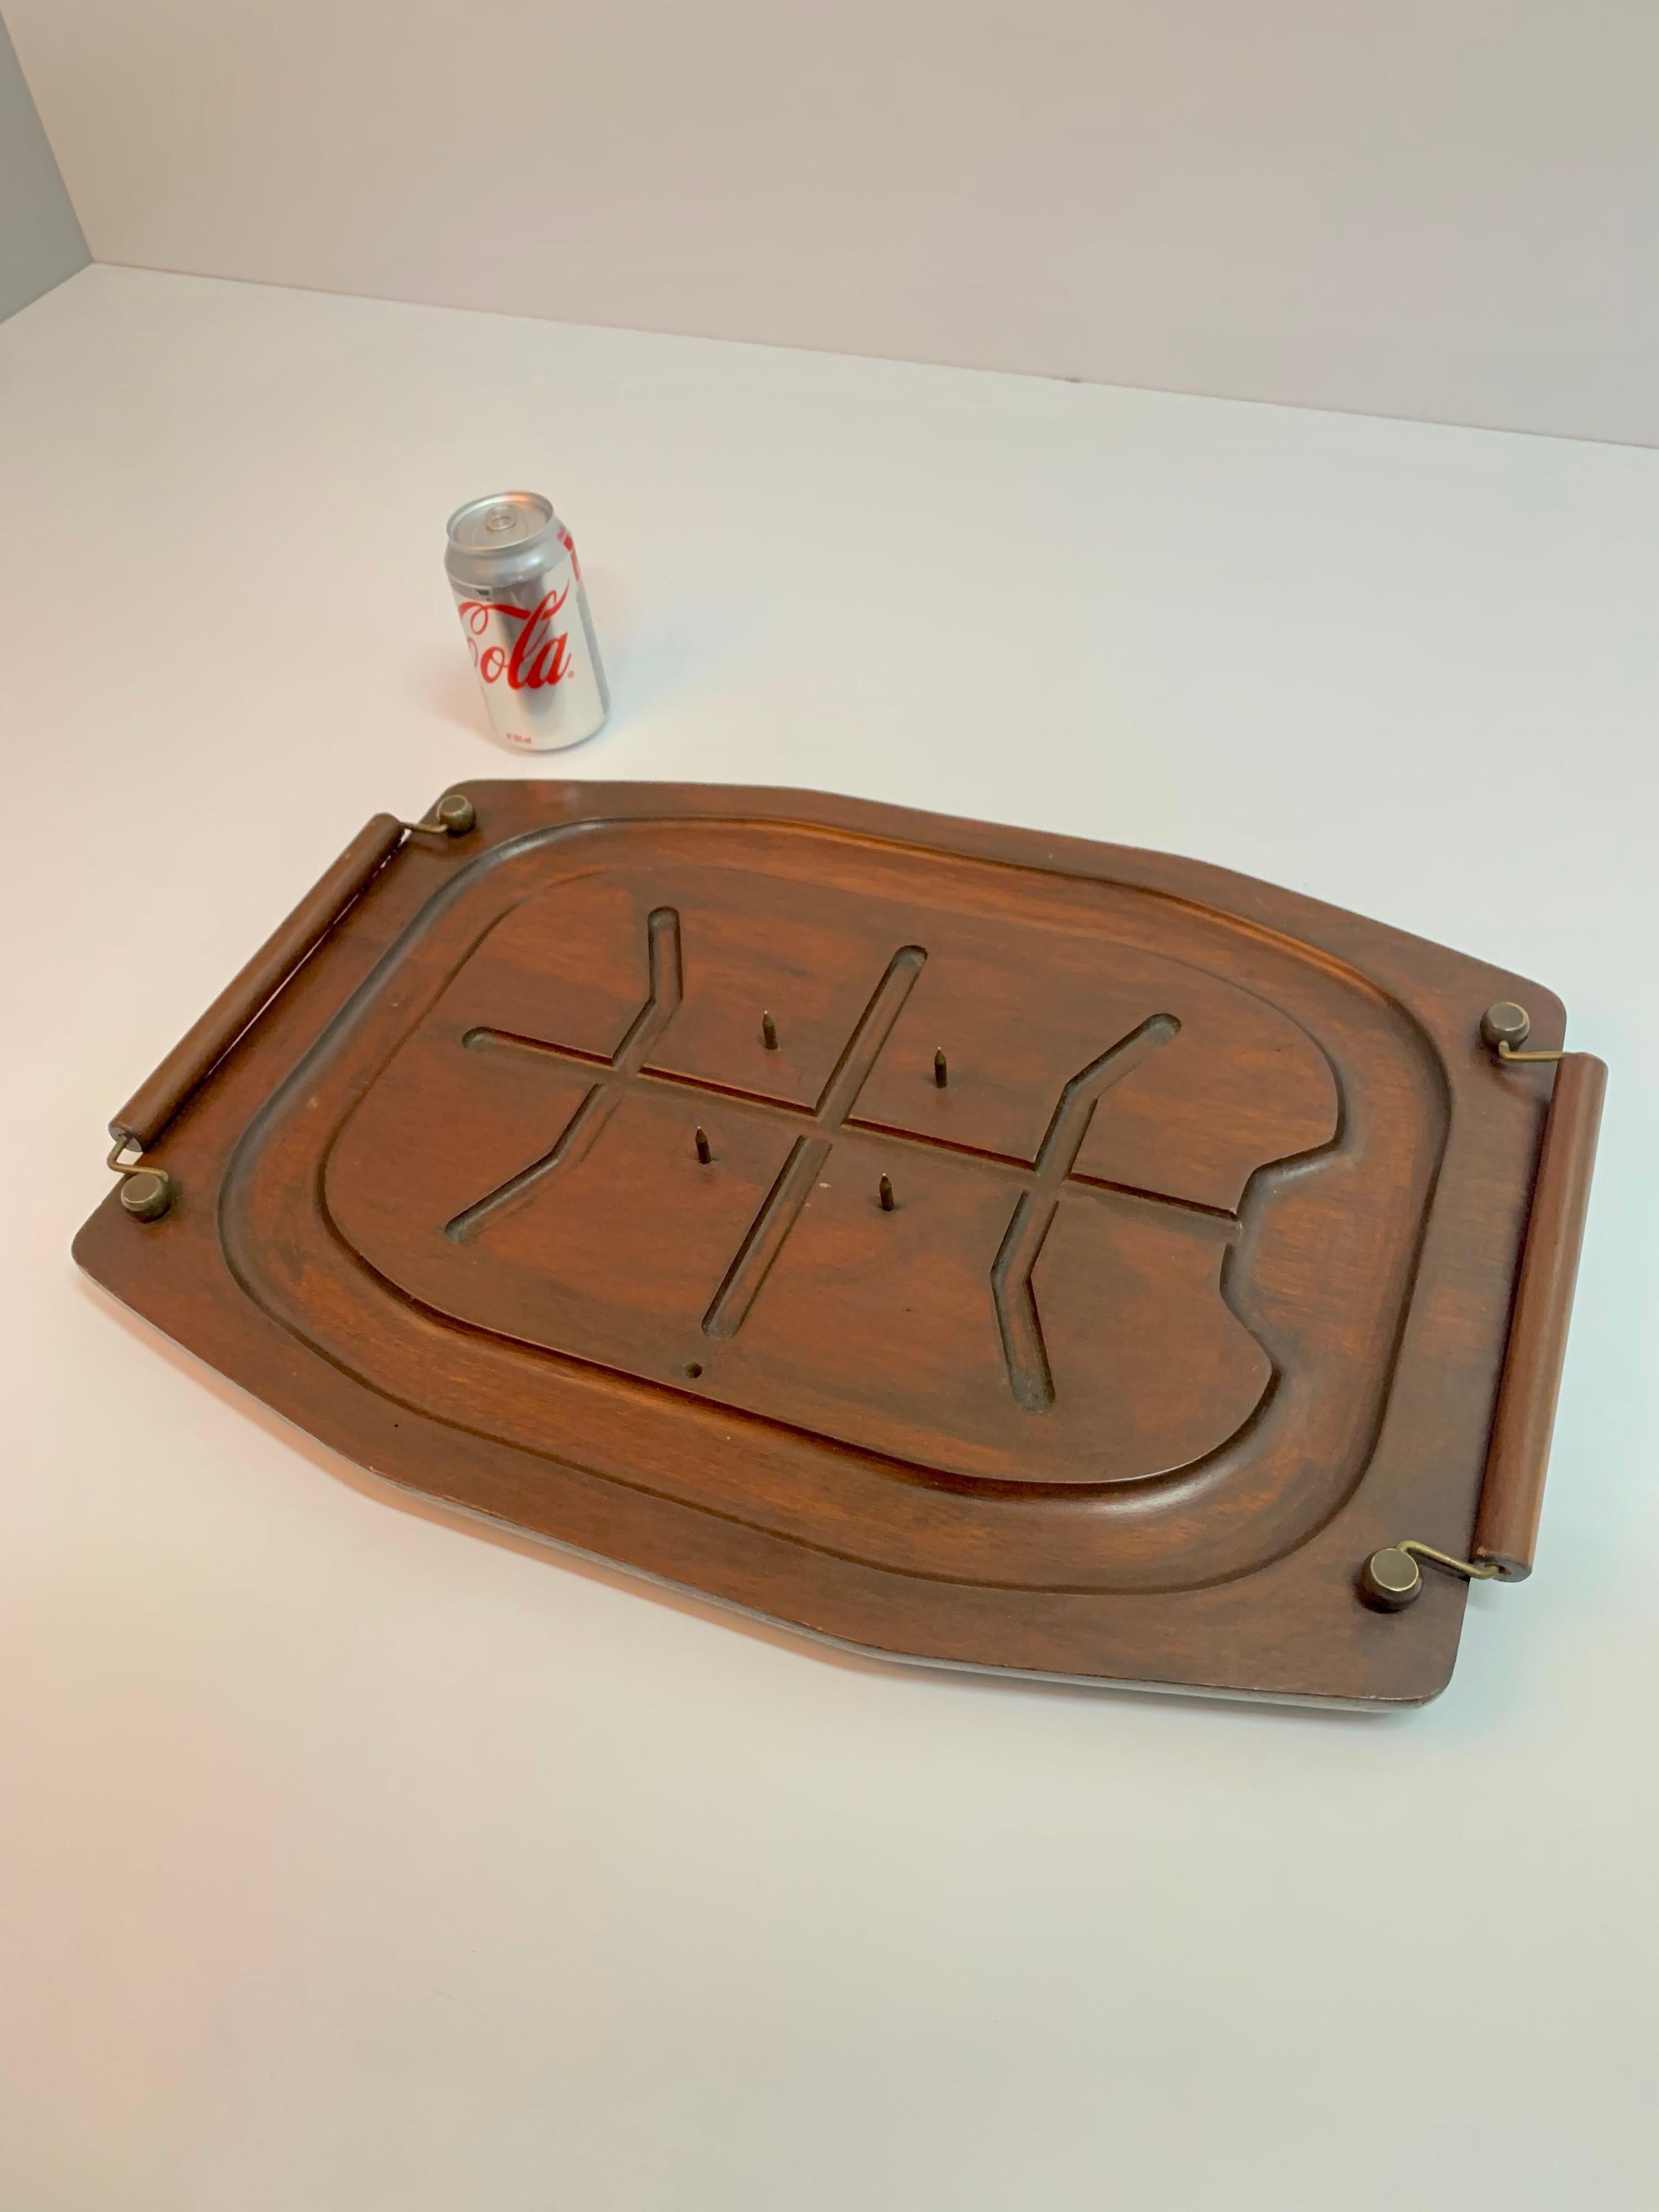 Hector Aguilar with this piece shows us what a born artist he was, the works he did in wood are few, that's why this rare tray is an exceptional piece, we believe that the best way to preserve this work is to leave it as it was recovered, that is to